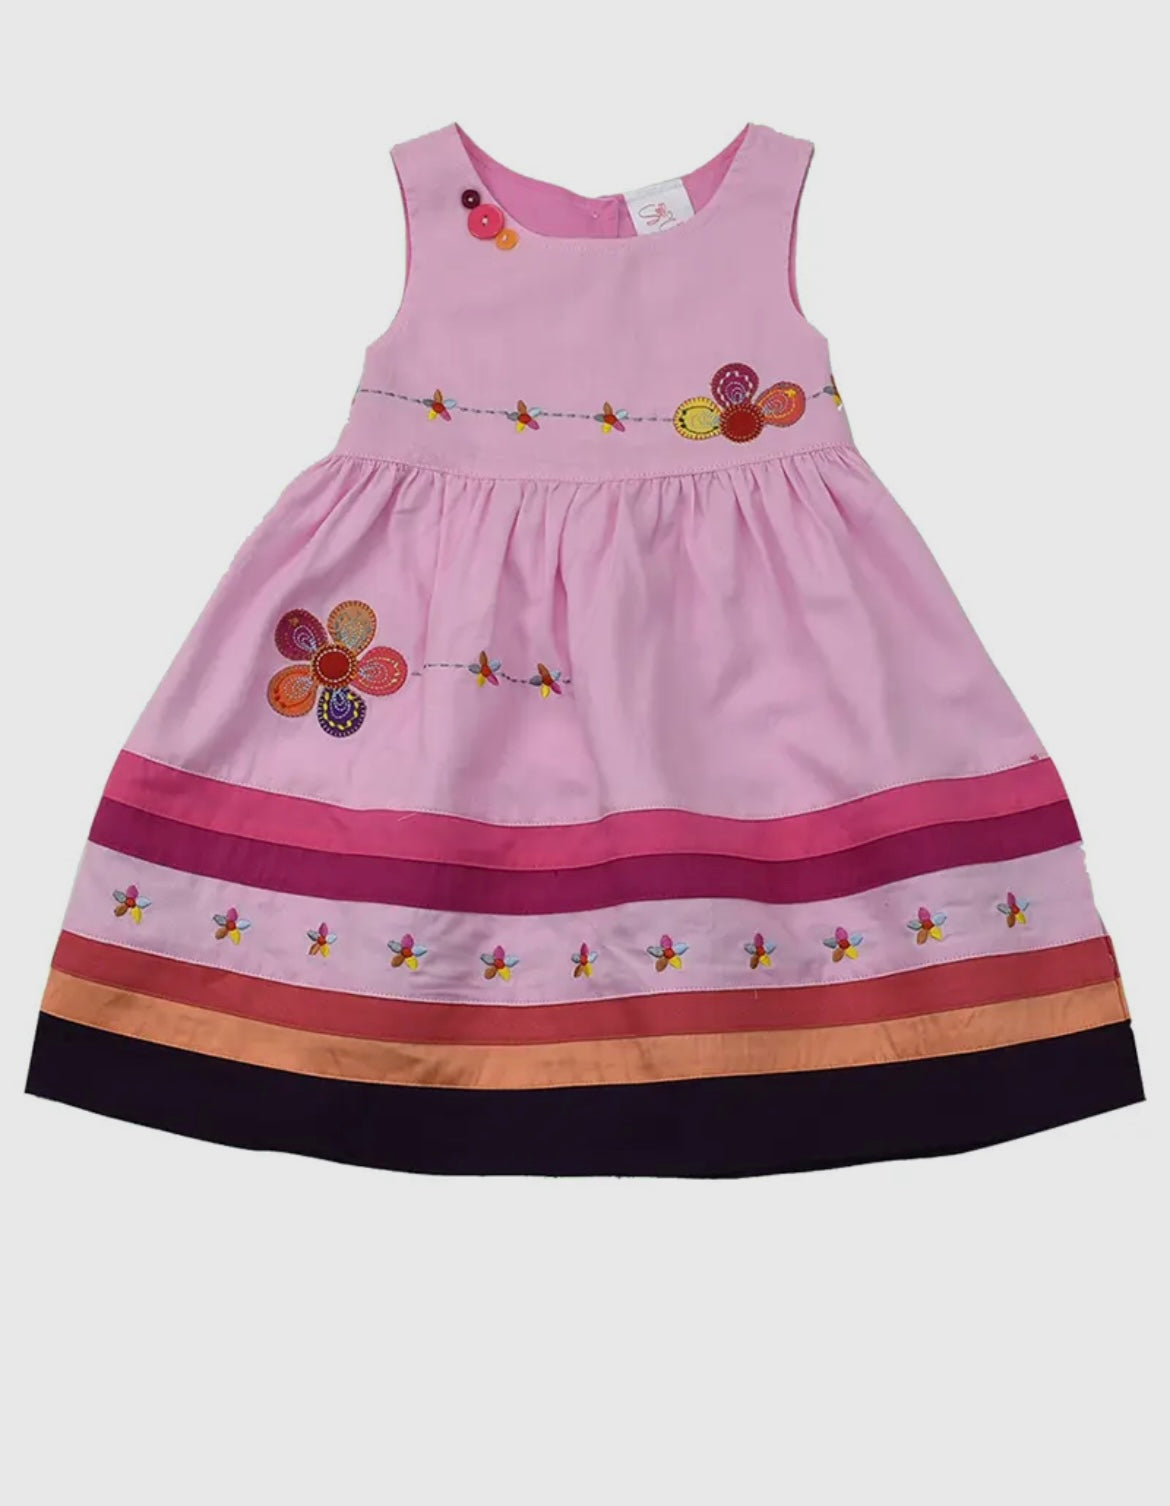 Toddler Girl Soft Cotton Applique With Embroidery